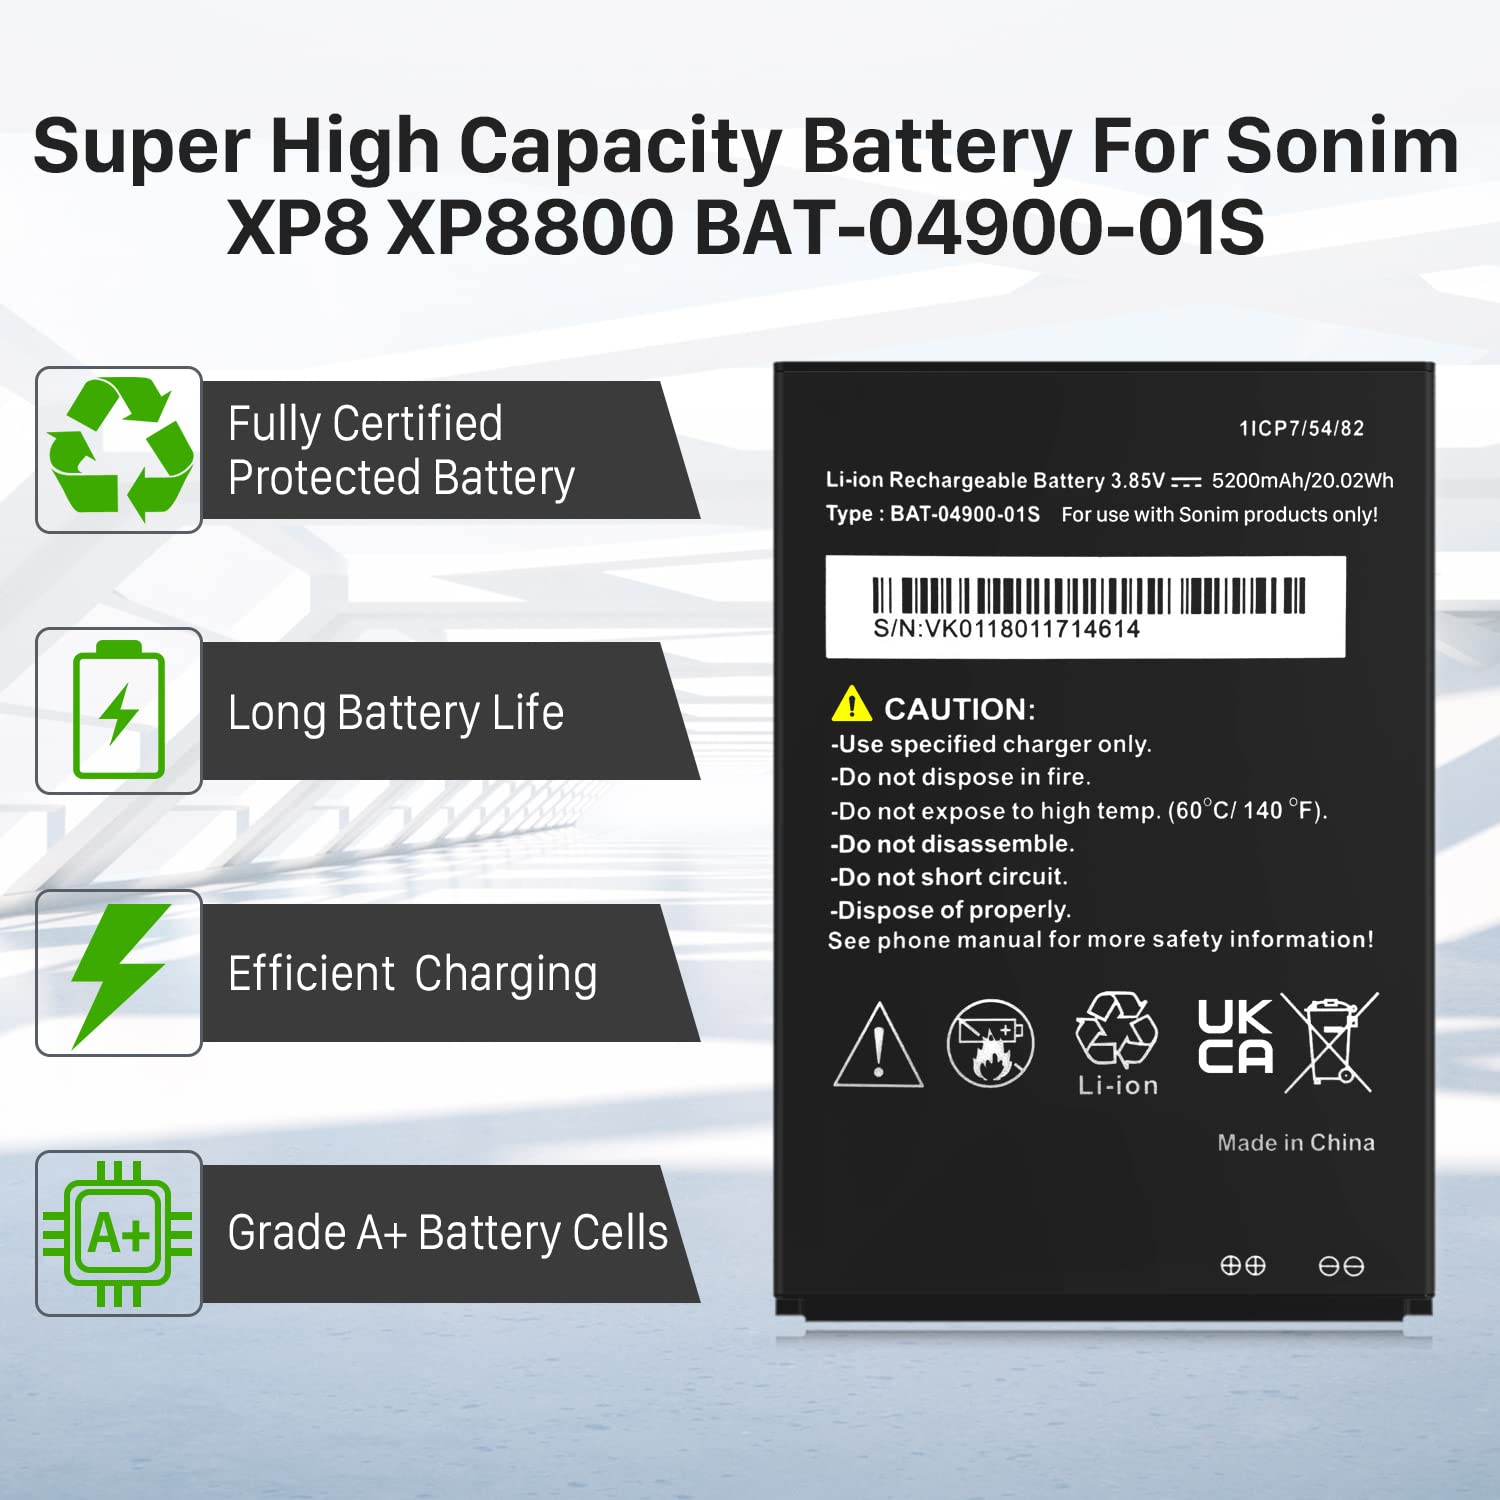 JDIRLDL Battery for sonim xp8, Upgraded High 5200mah Capacity Li-ion Polymer Replacement Battery for Sonim XP8 XP8800 BAT-04900-01S Battery Replacement